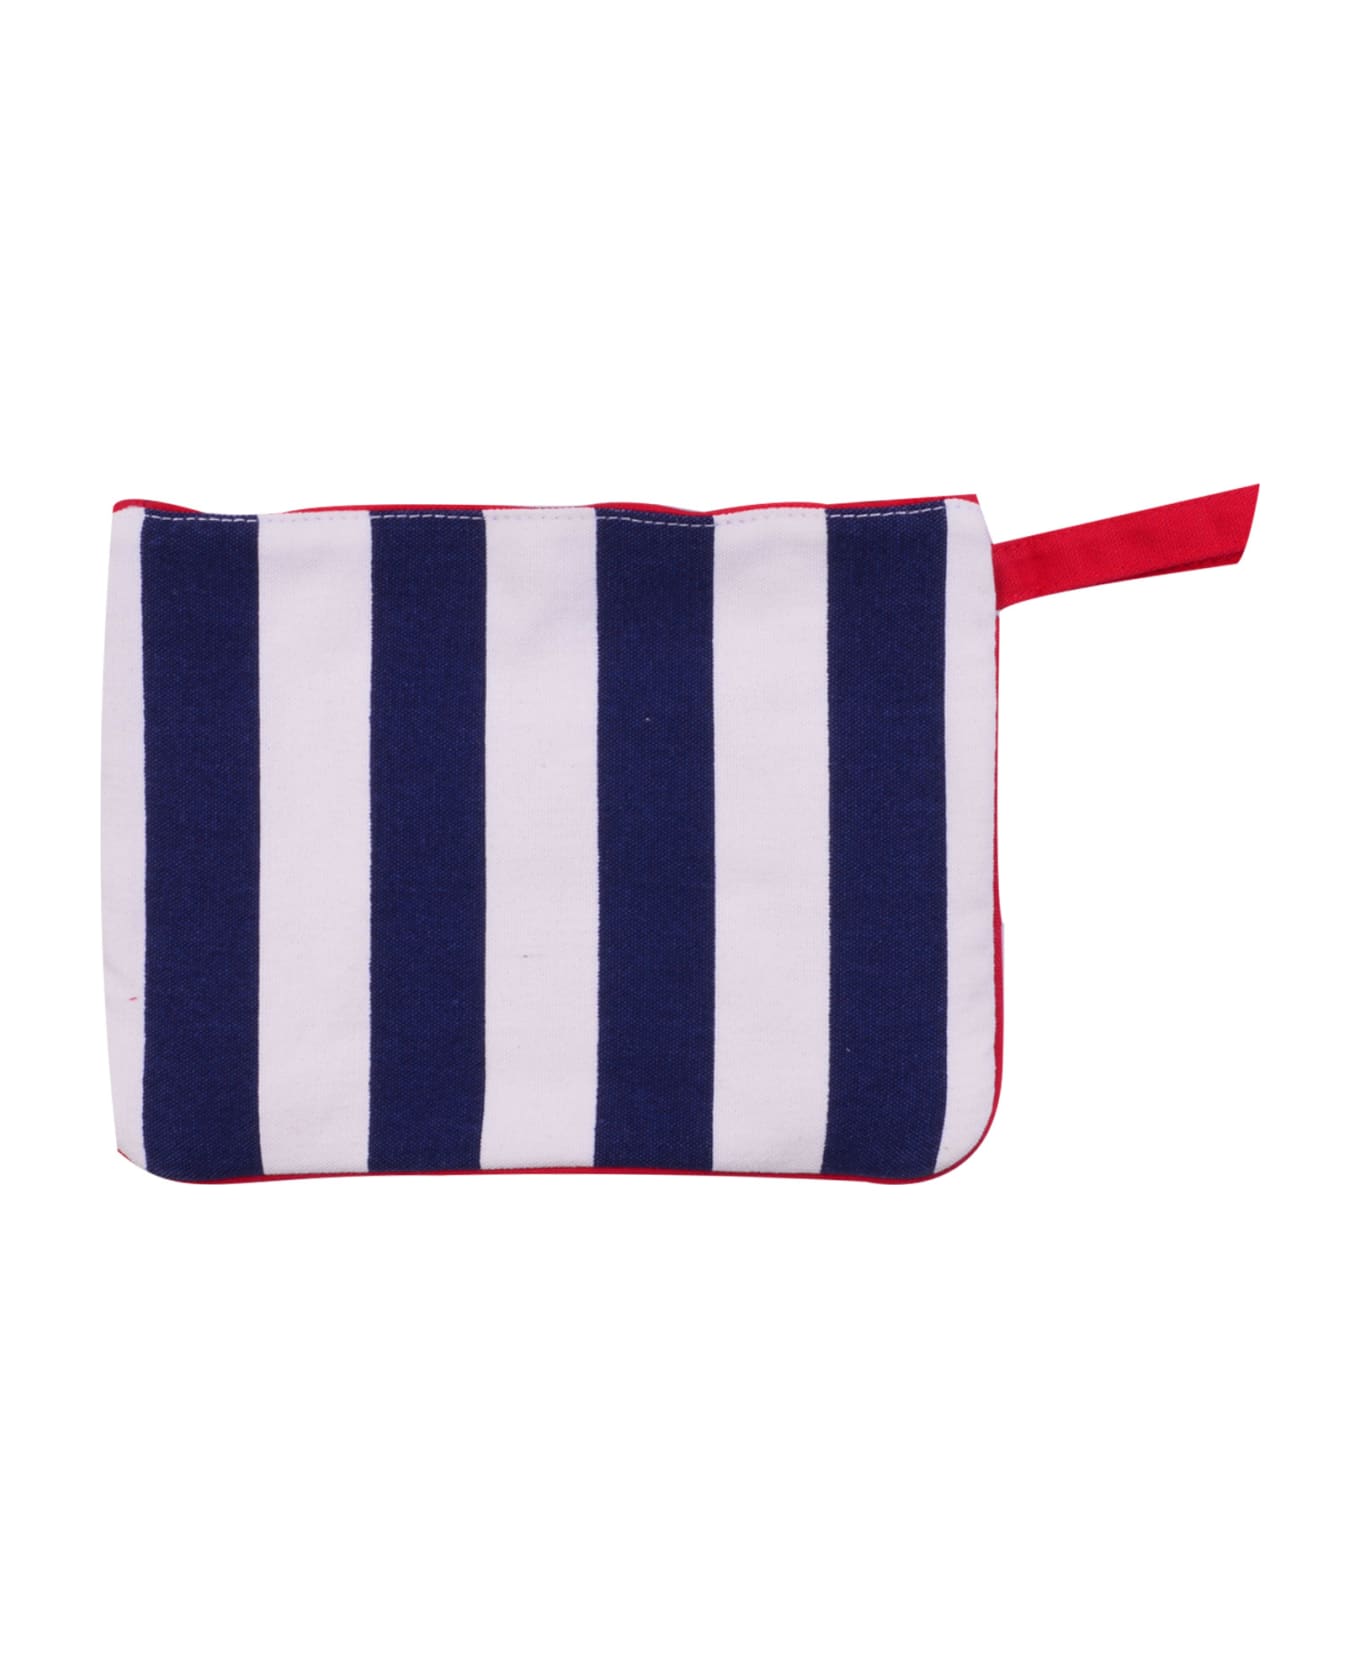 MC2 Saint Barth Canvas Clutch With Stripes - Multicolor アクセサリー＆ギフト